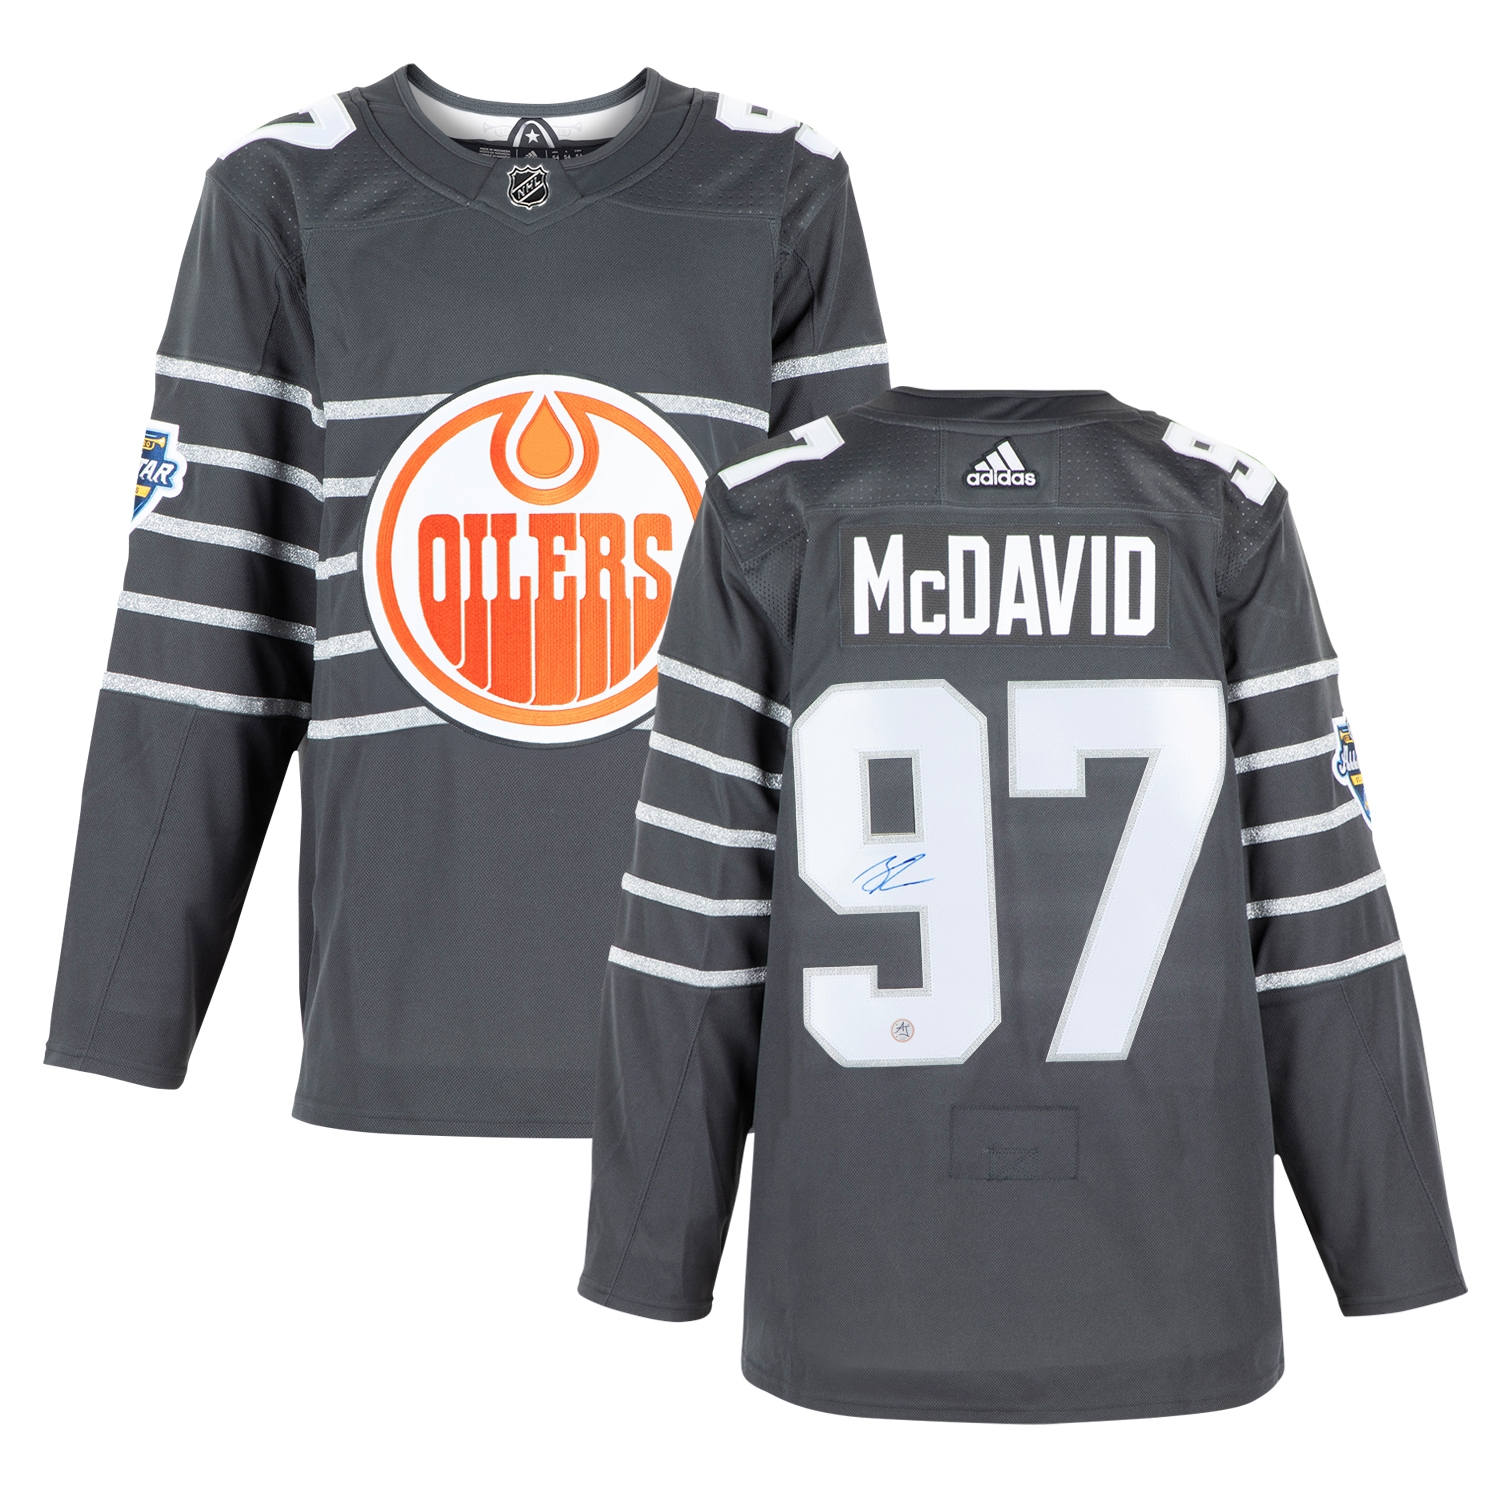 Connor McDavid Autographed 2020 NHL All-Star Game adidas Jersey